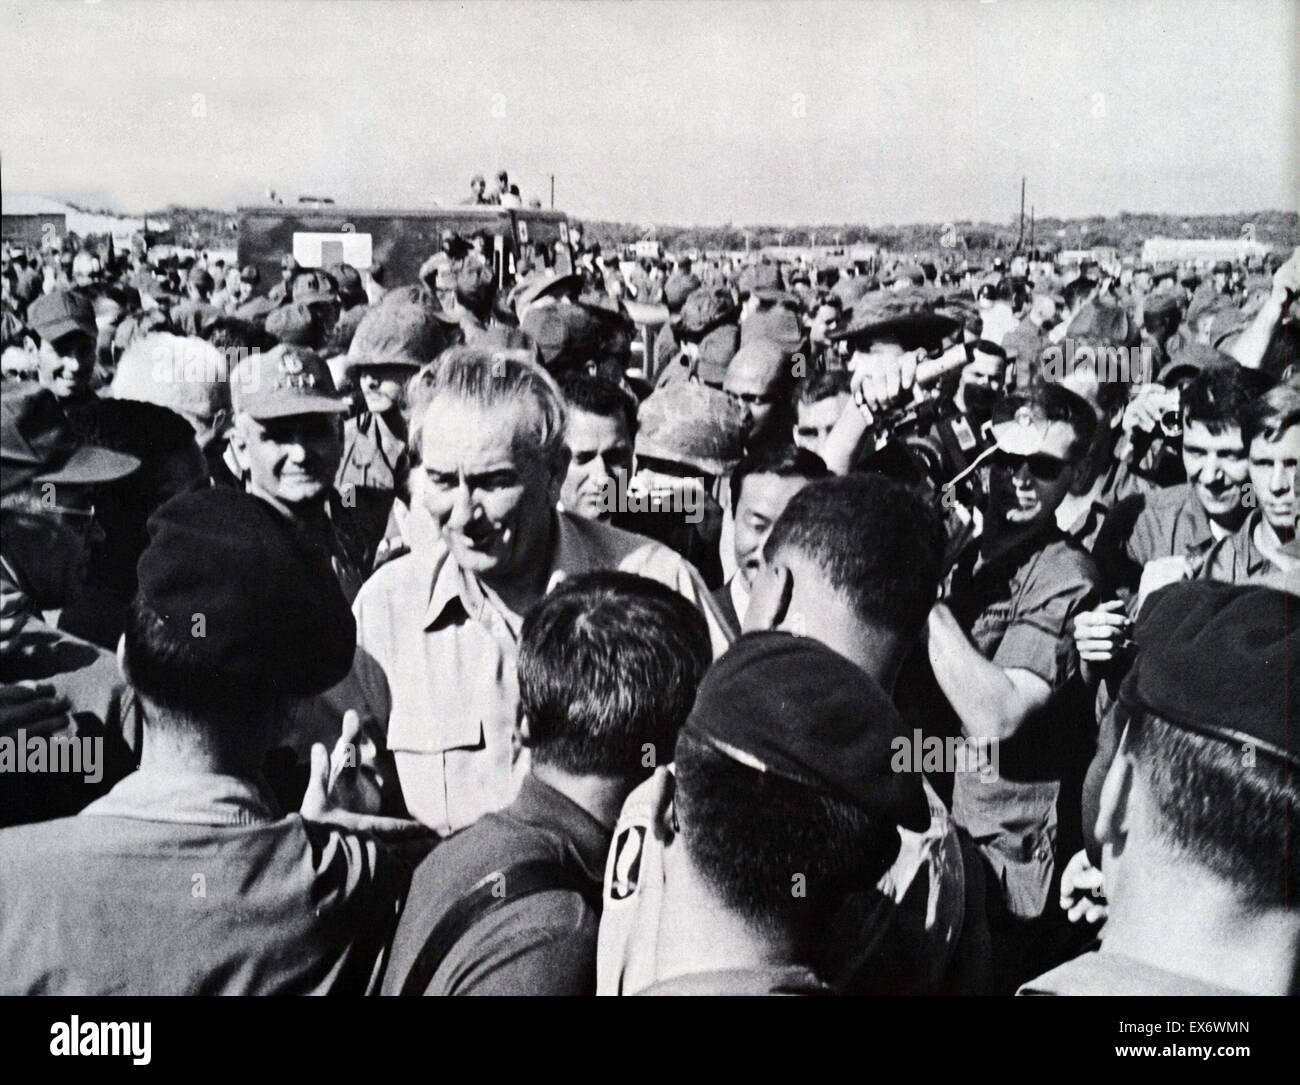 President Lyndon B. Johnson's brief visit to Cam Ranh Bay airbase in South Vietnam 1967 . Shows President Johnson addressing 7000 assembled troops, reviewing troops with USA General William C. Westmoreland and Air Vice Marshall Ky Stock Photo